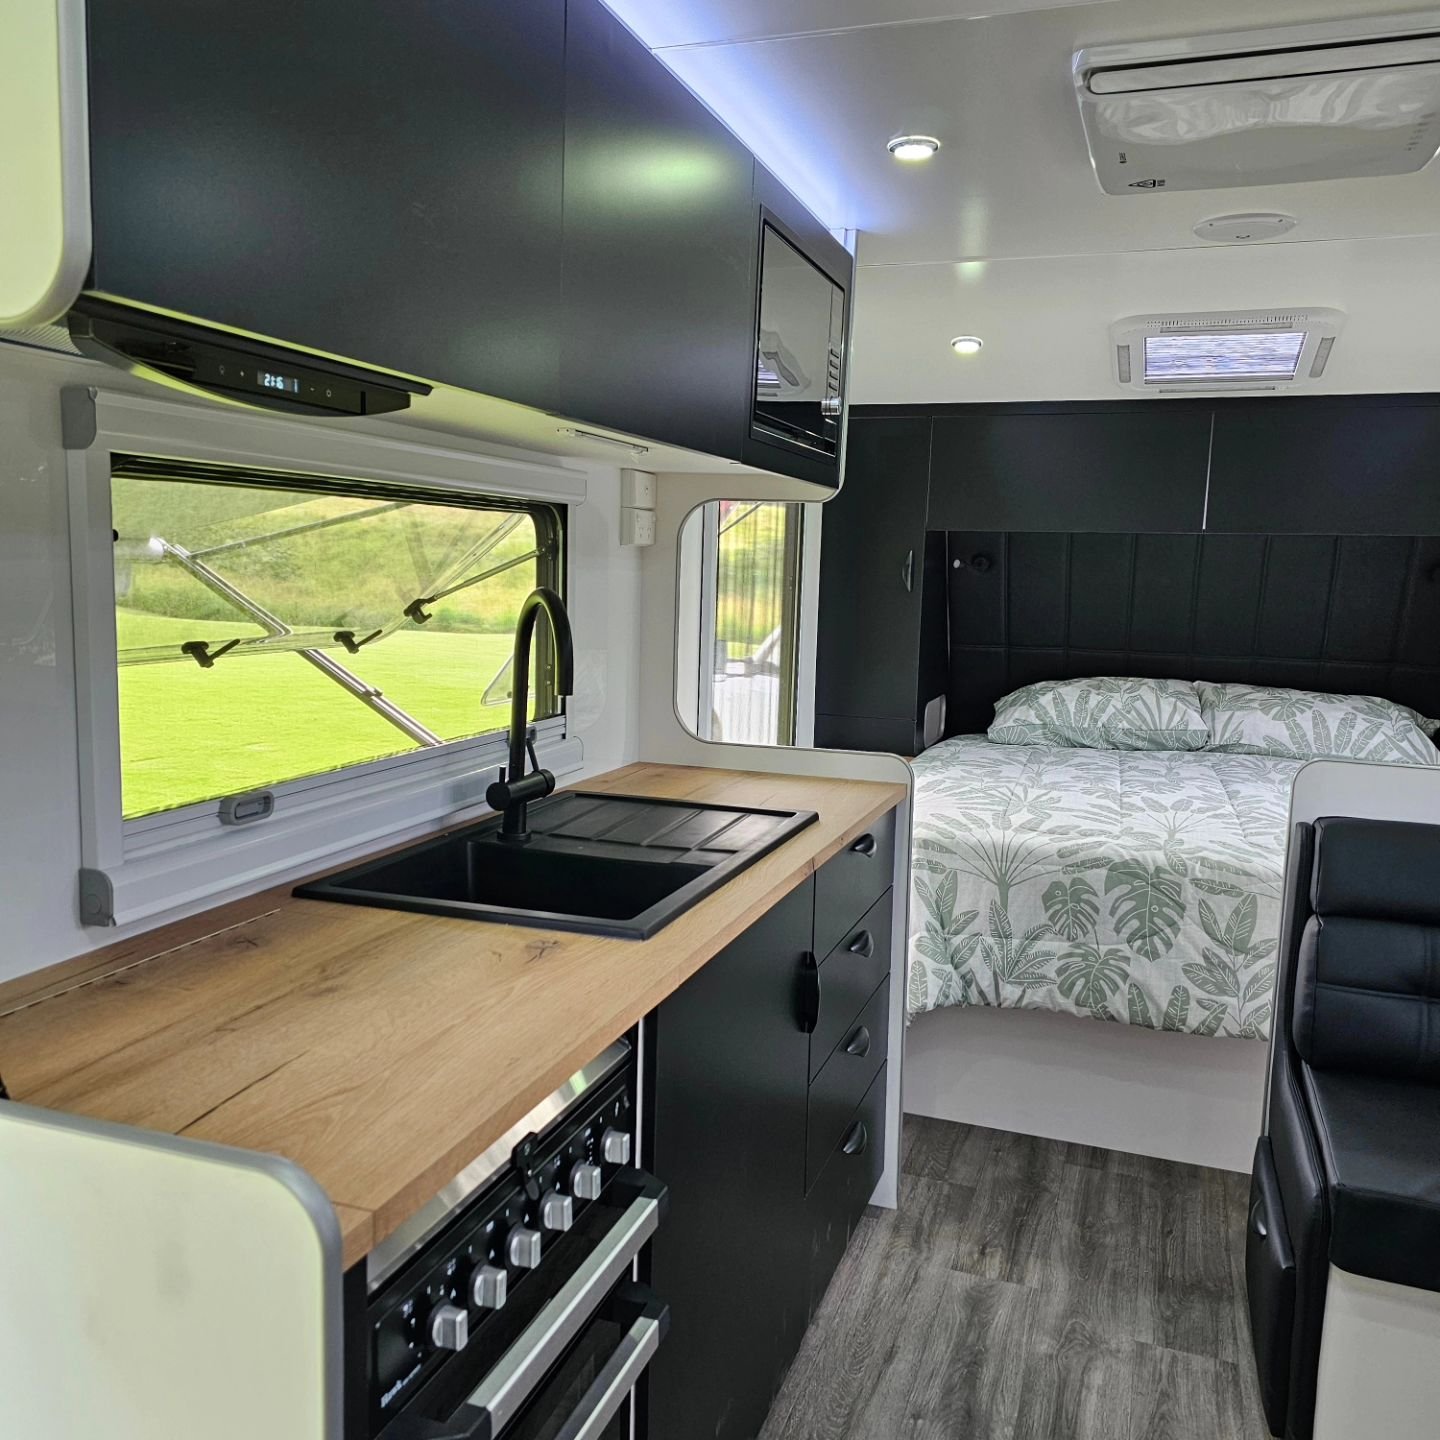 19.6 Rear door couples layout with cafe seating is a really comfortable size for 2 people. This layout provides a more private sleeping area, being a rear door and versatile seating space with a trifold table and still retaining the full separate ens